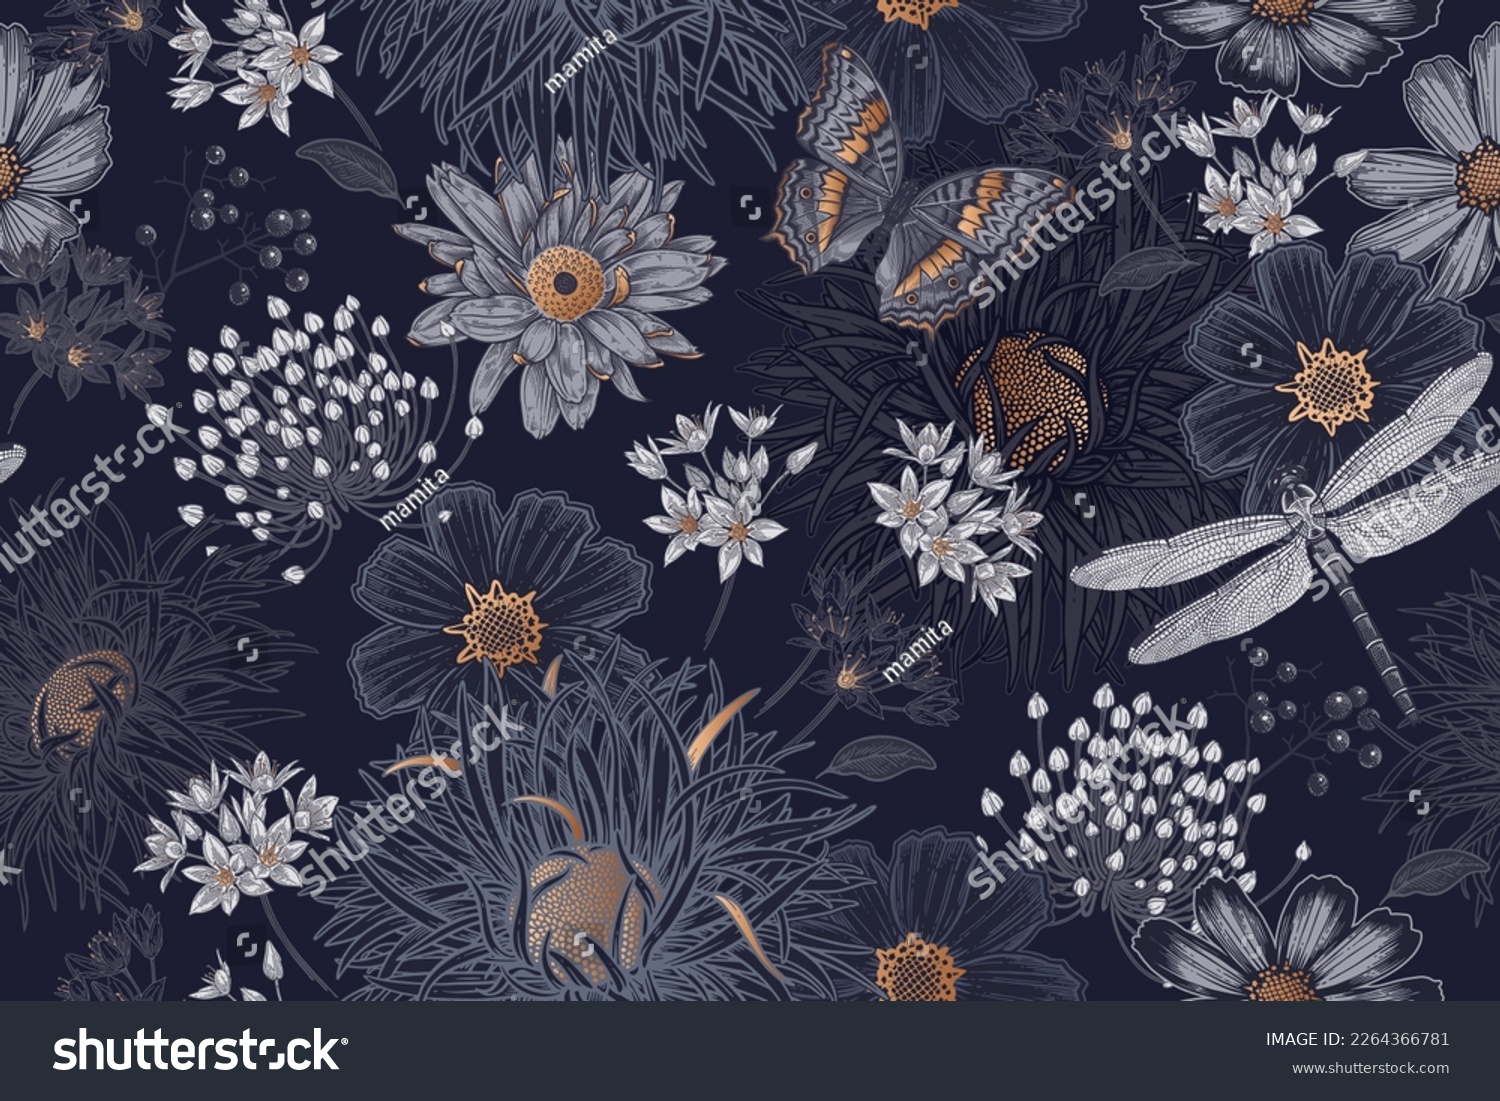 Cute wildflowers, butterflies and dragonflies seamless pattern. Flowers and insects. Vector art illustration. Navy blue background and gold foil printing. Floral pattern for textiles, paper, wallpaper #2264366781